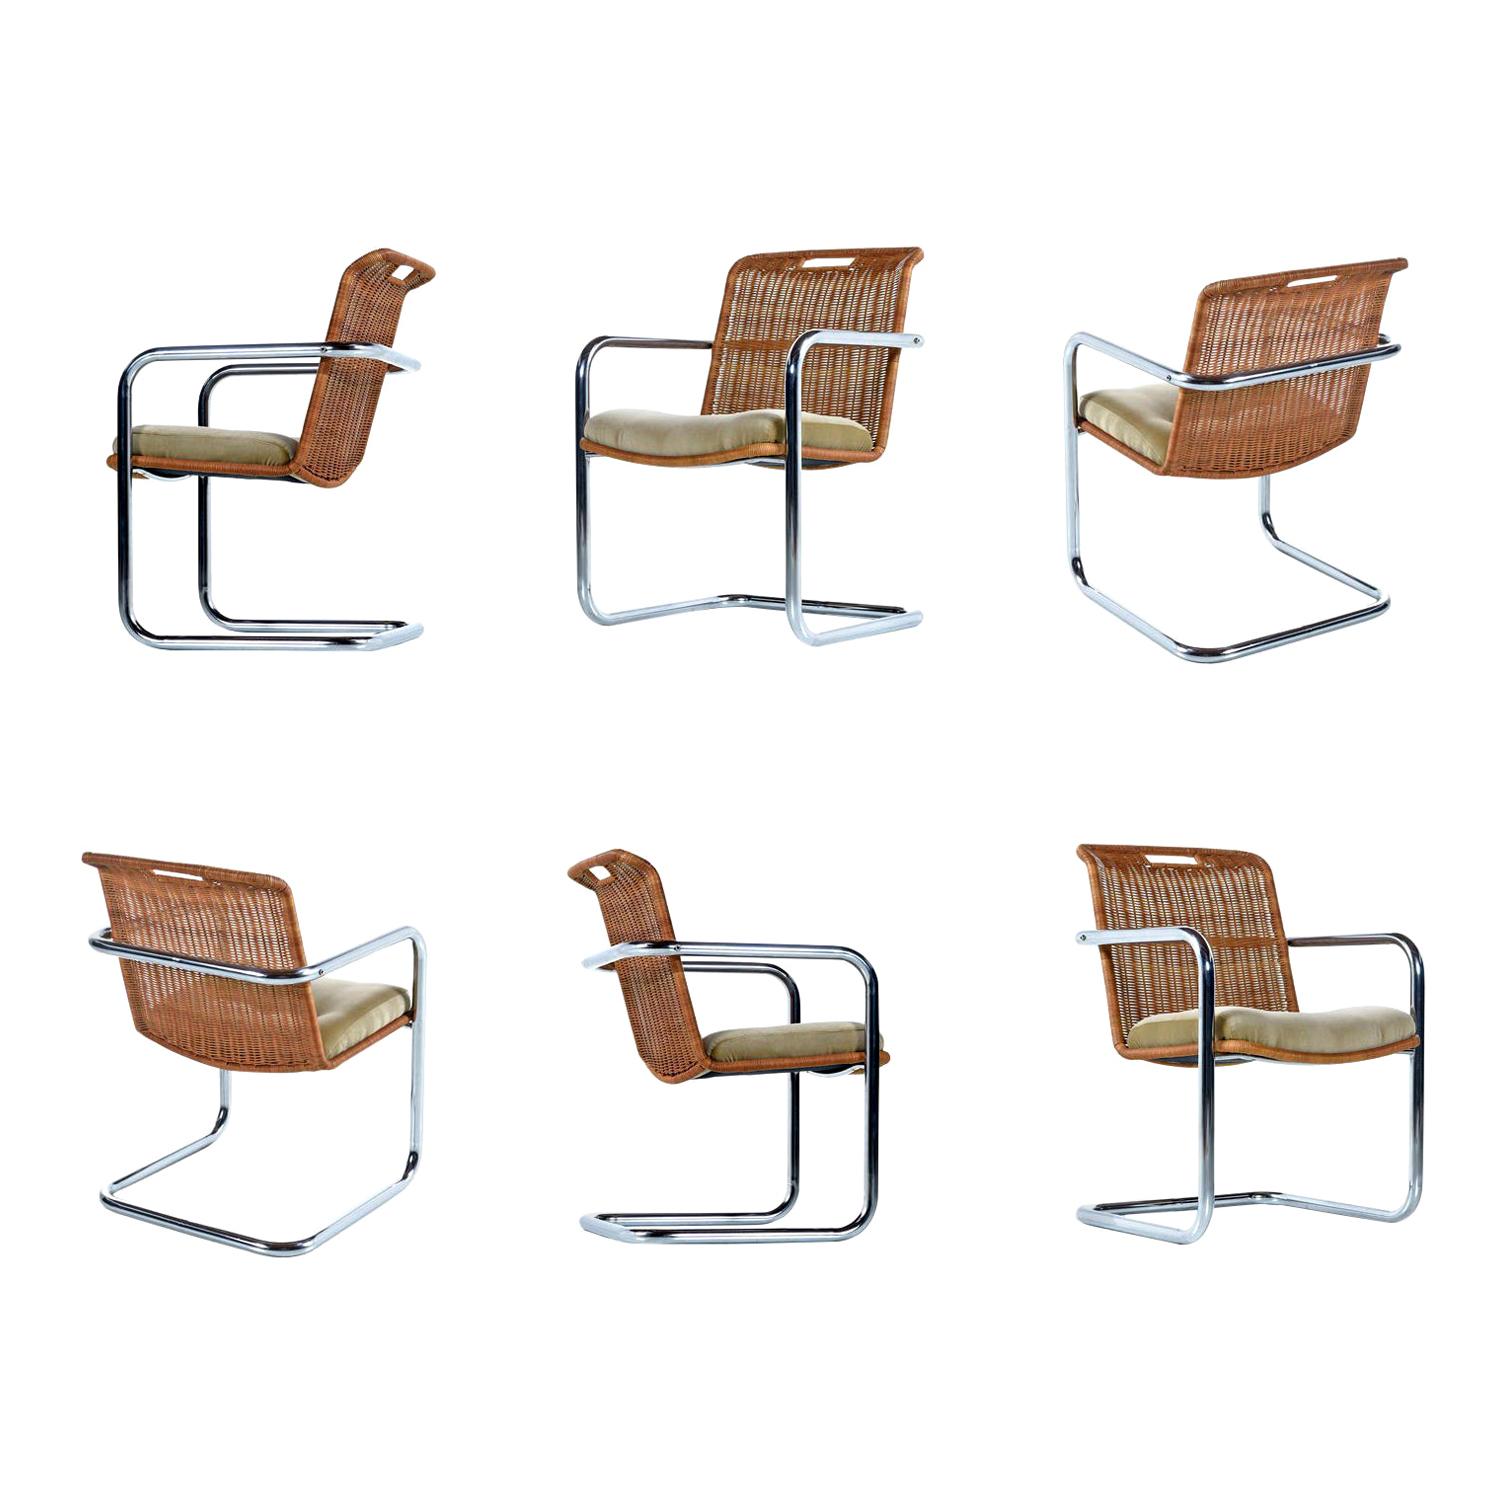 Cantilever Chrome Wicker Rattan Modern Dining Chairs by Chromcraft